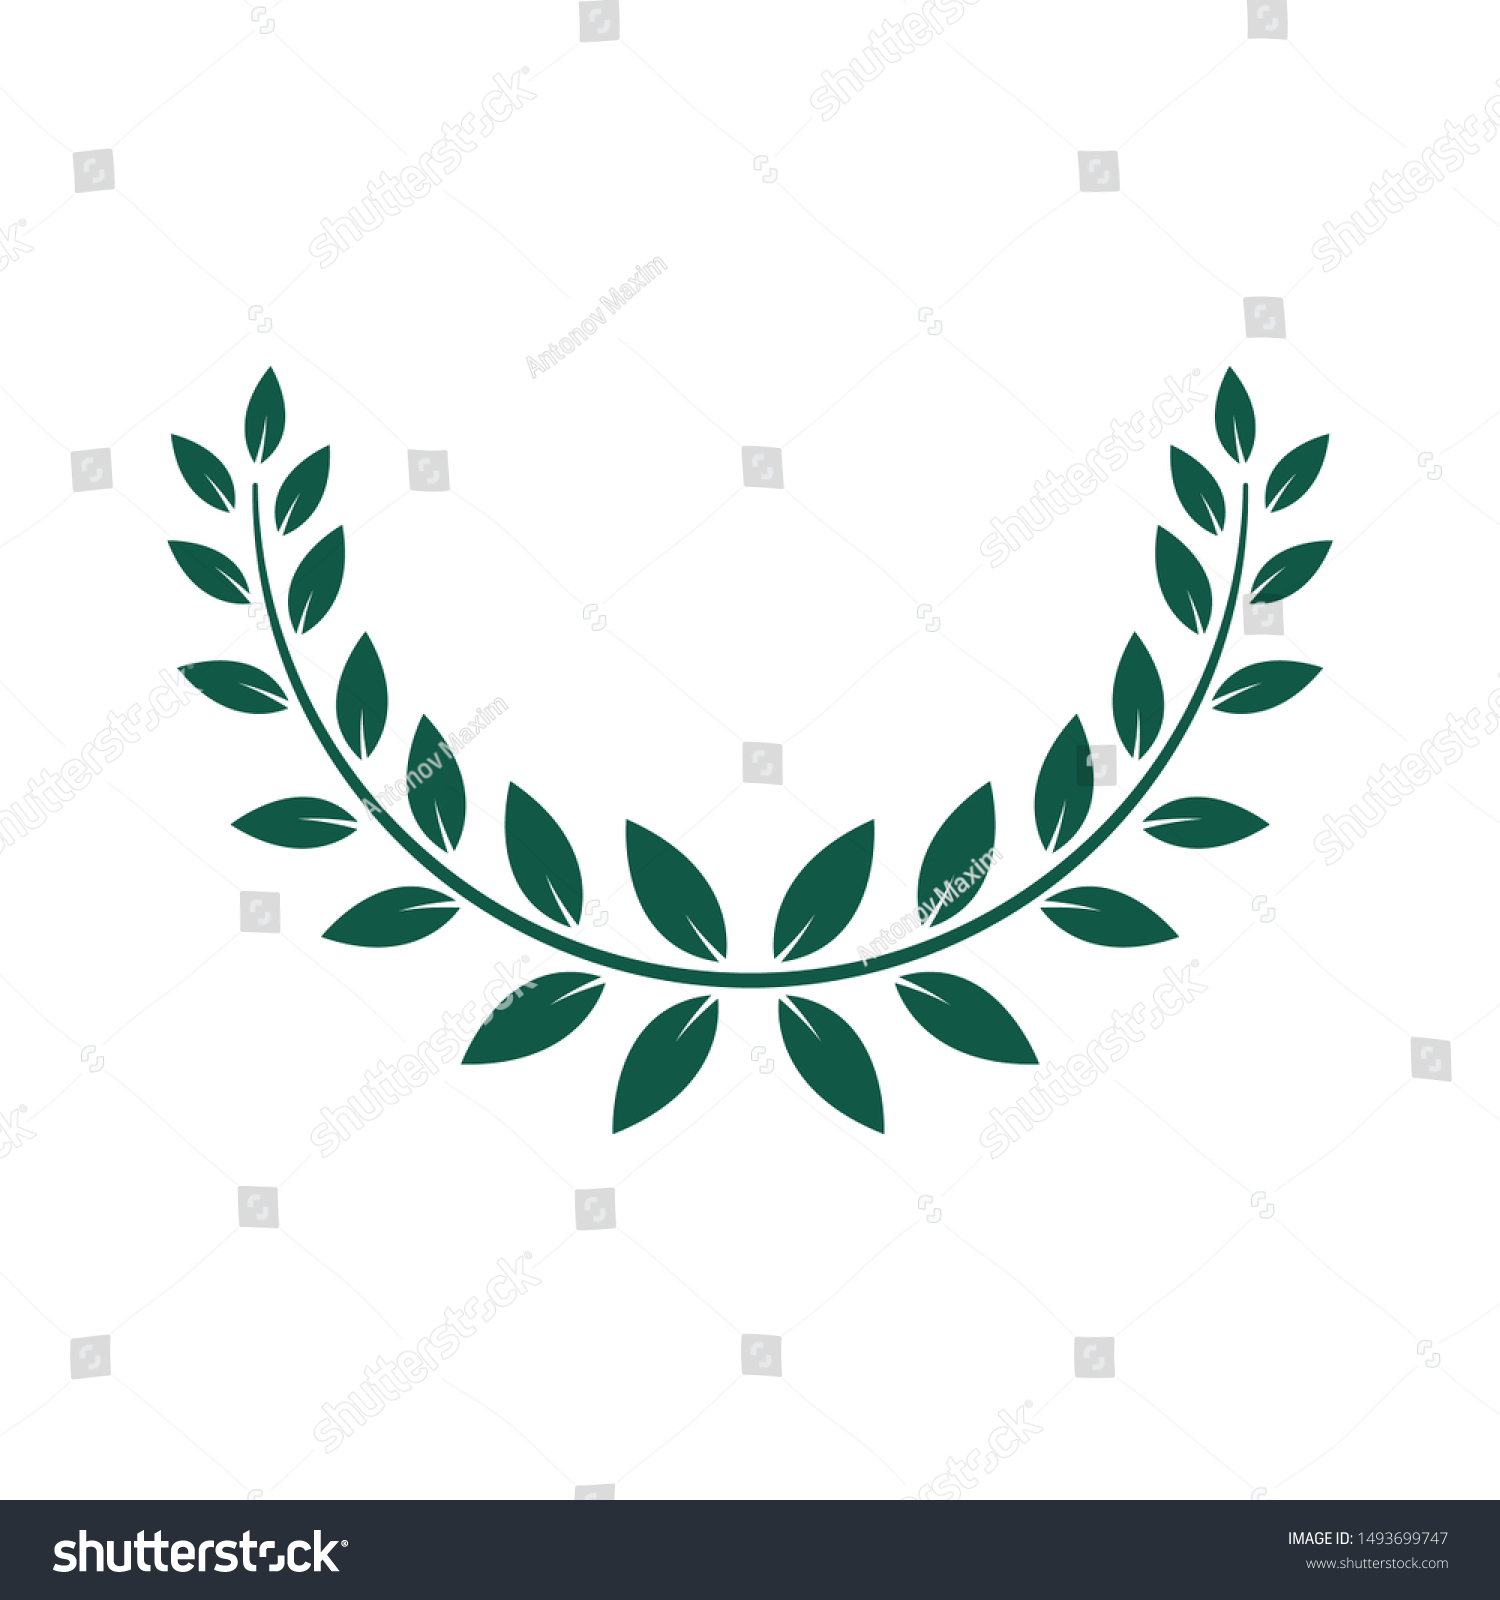 SVG of Geometric wreath with green with leaves around a round branch, flat laurel frame icon for award decoration or heraldic certificate design, isolated vector illustration on white background svg